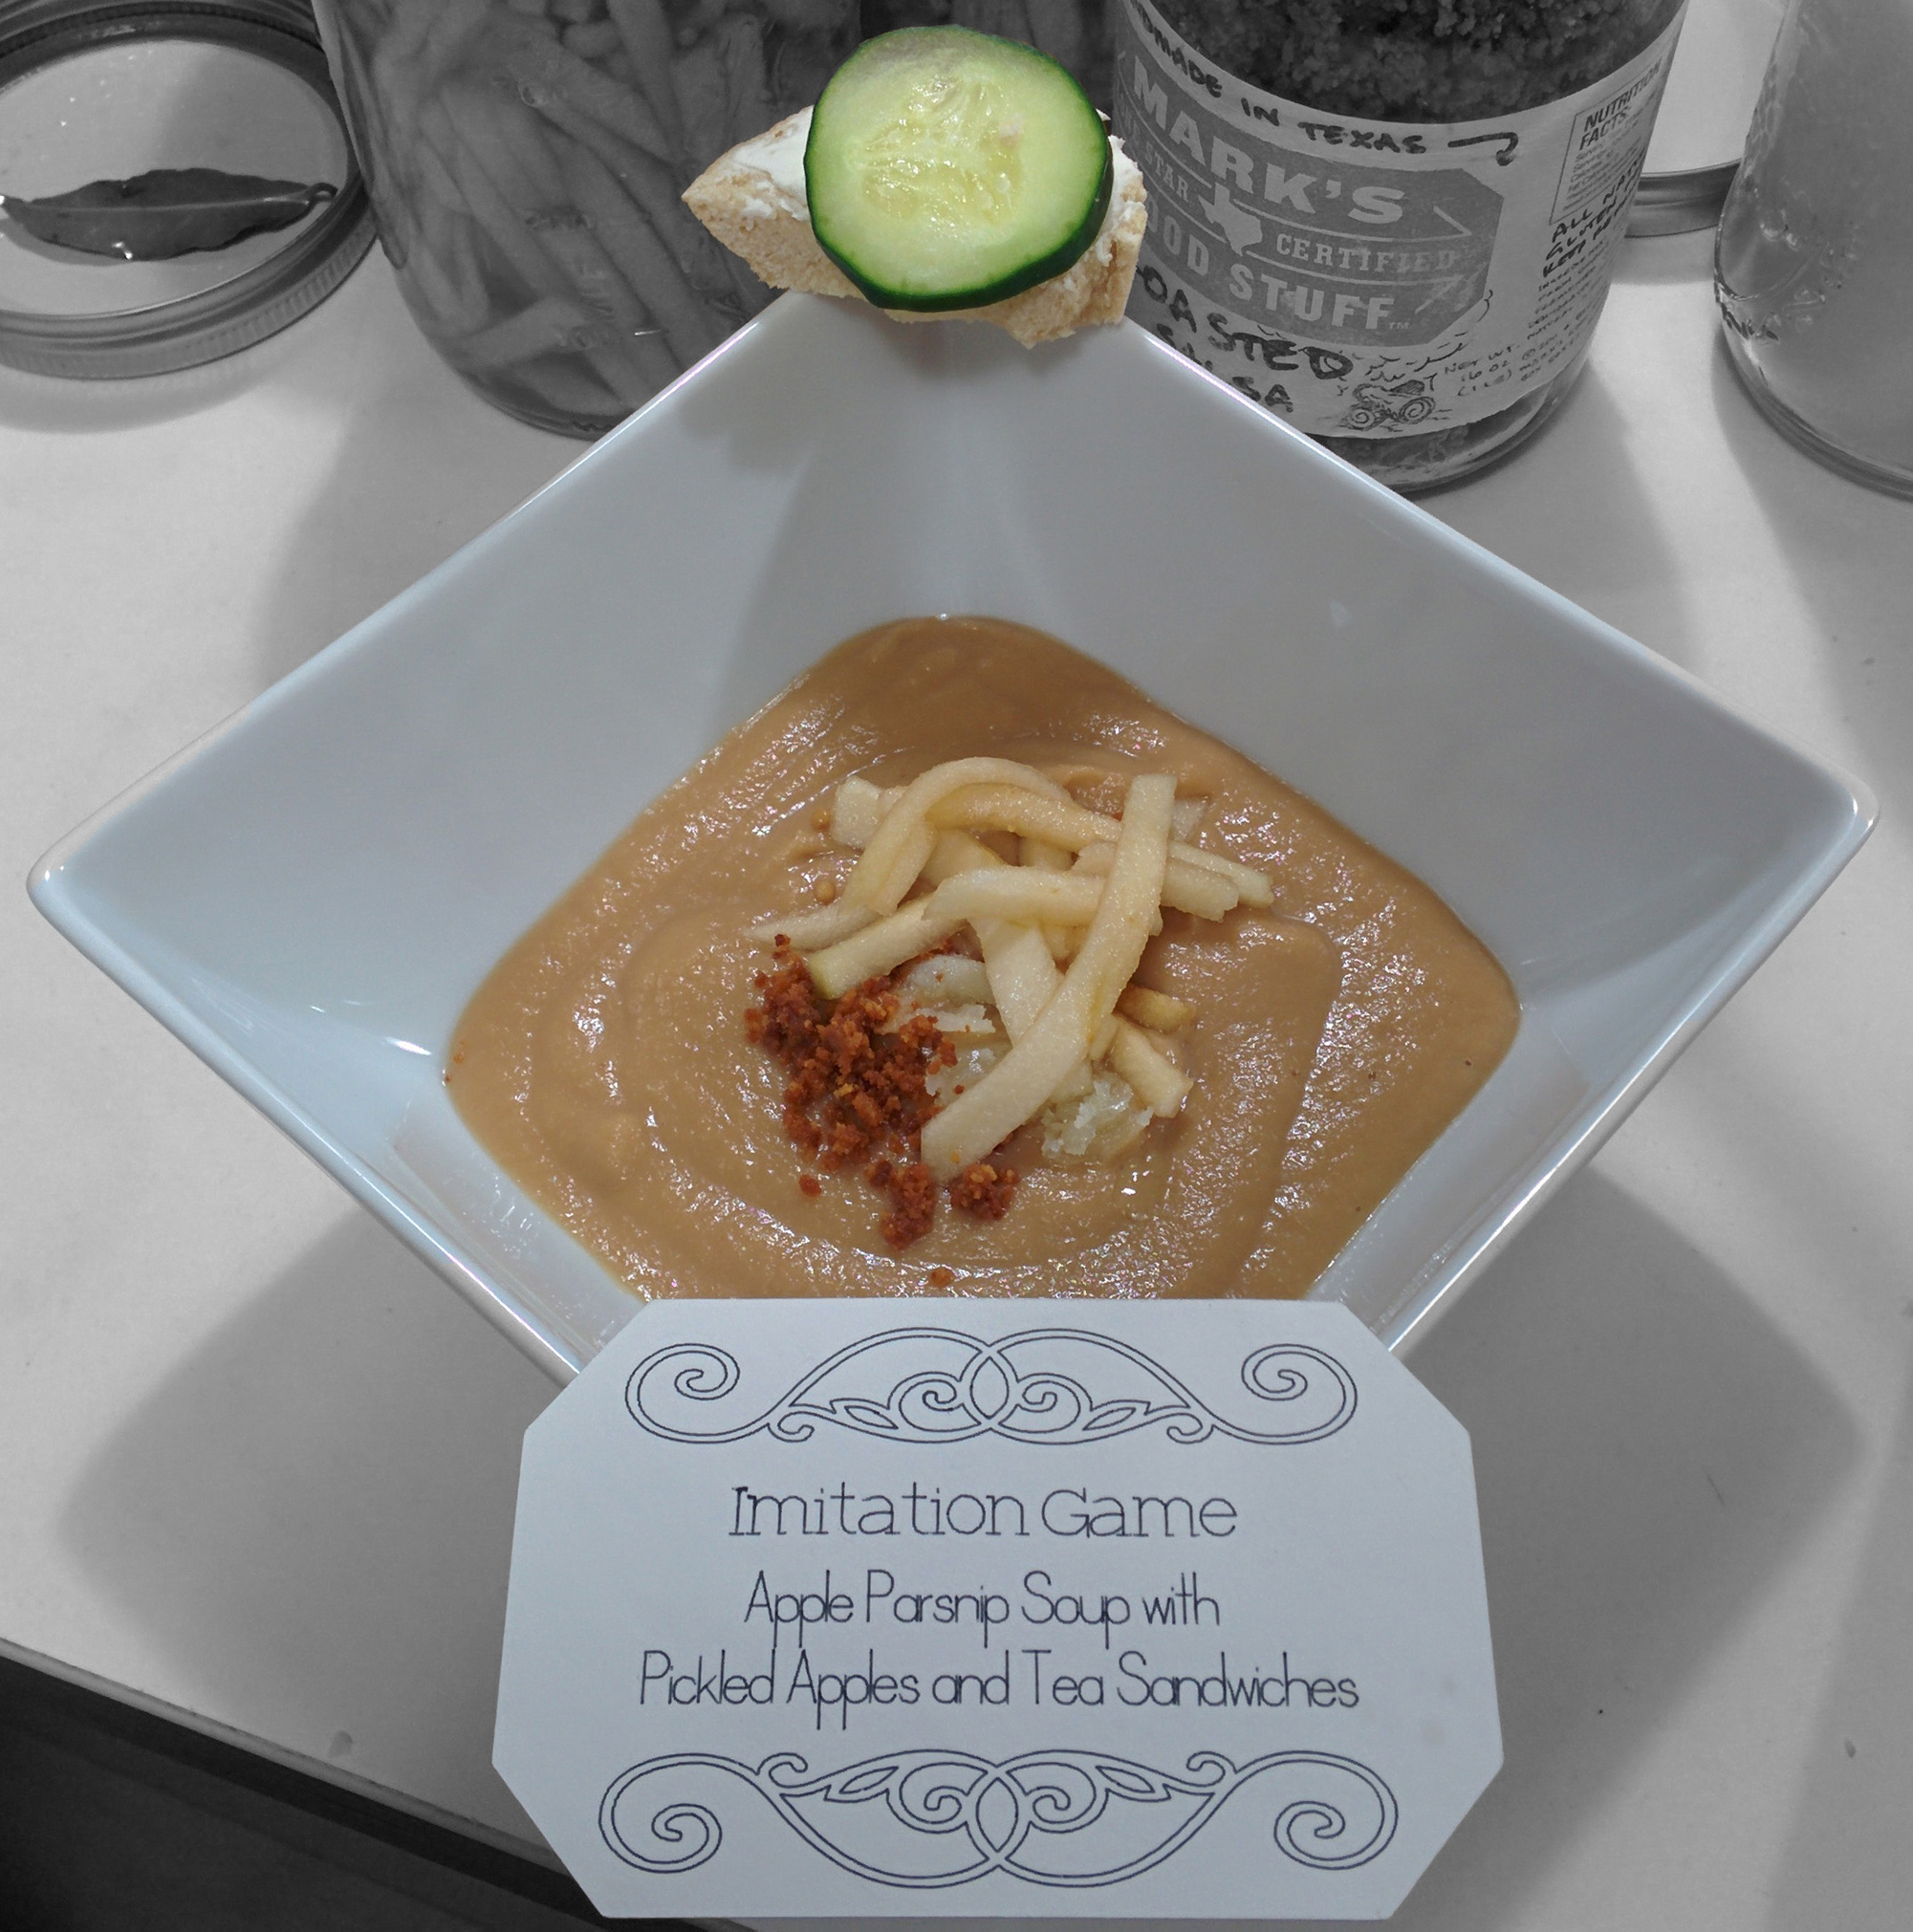 The Imitation Game: Apple parsnip soup with pickled apples and tea sandwich